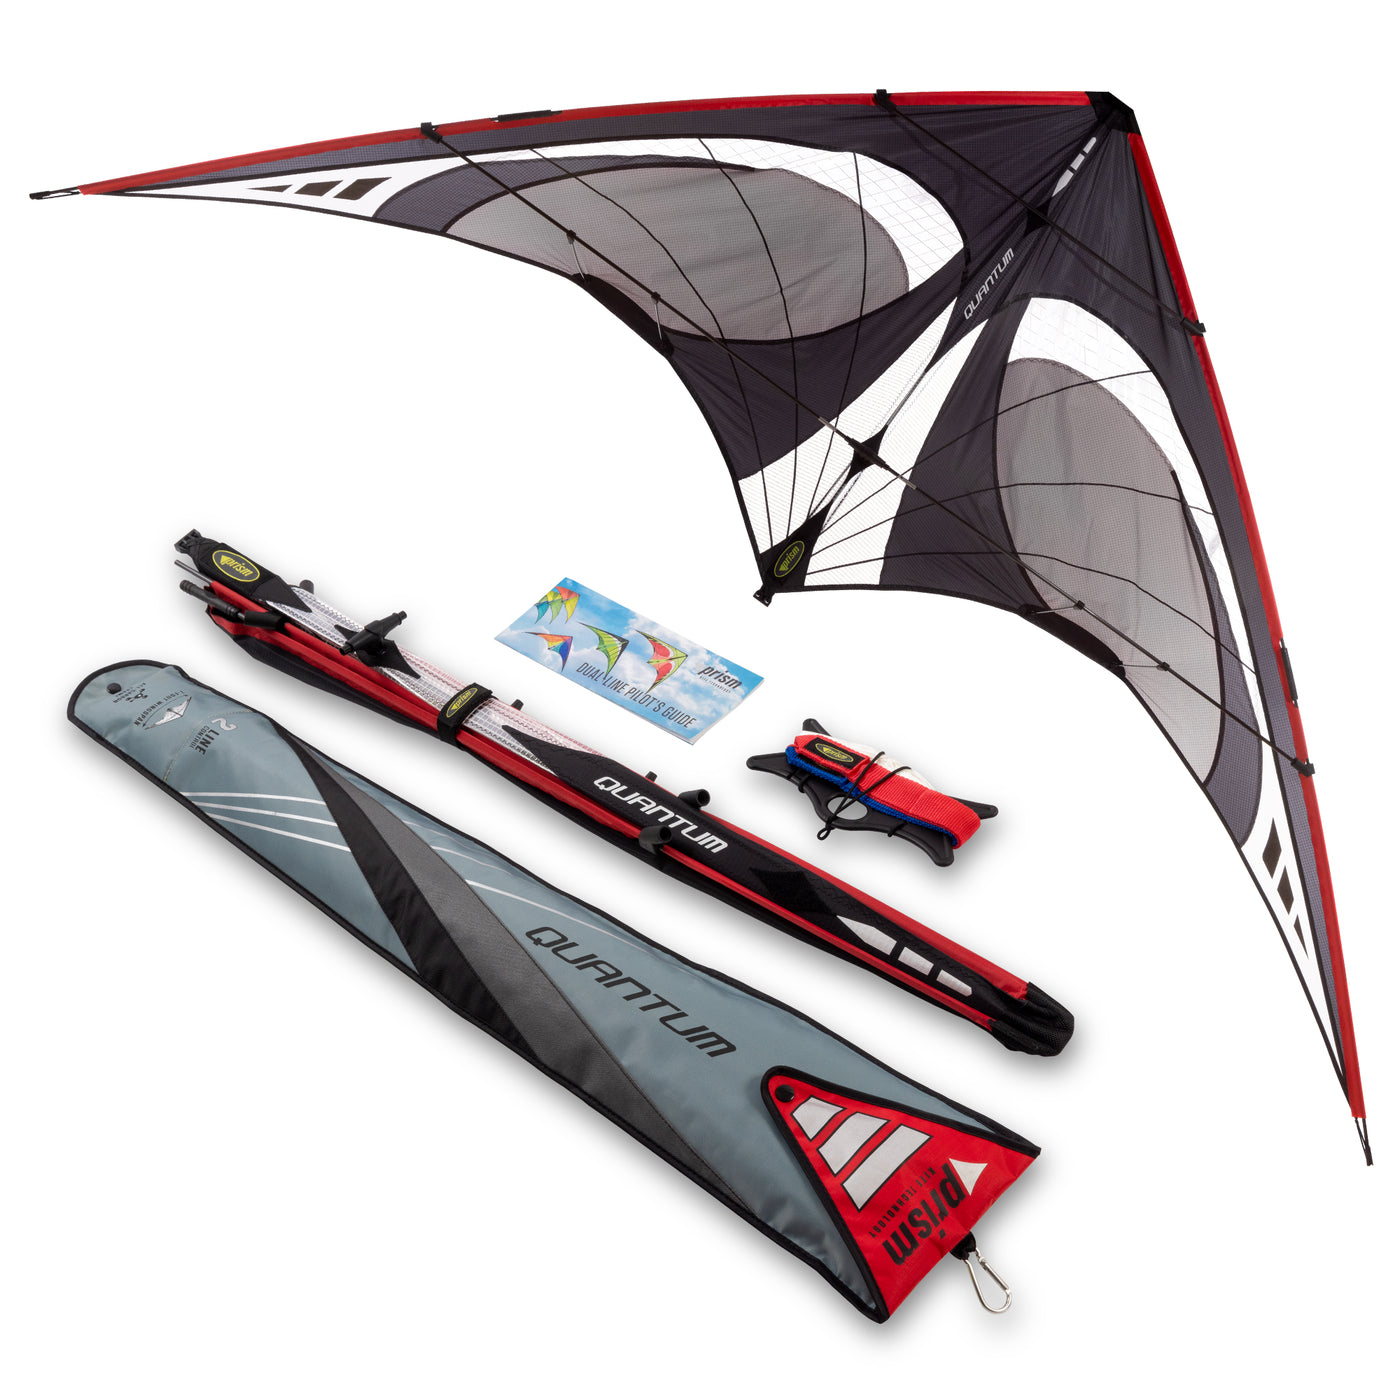 A nighthawk Quantum 2.0 in red, gray, and black on a white background with flying lines, instructions, and bag